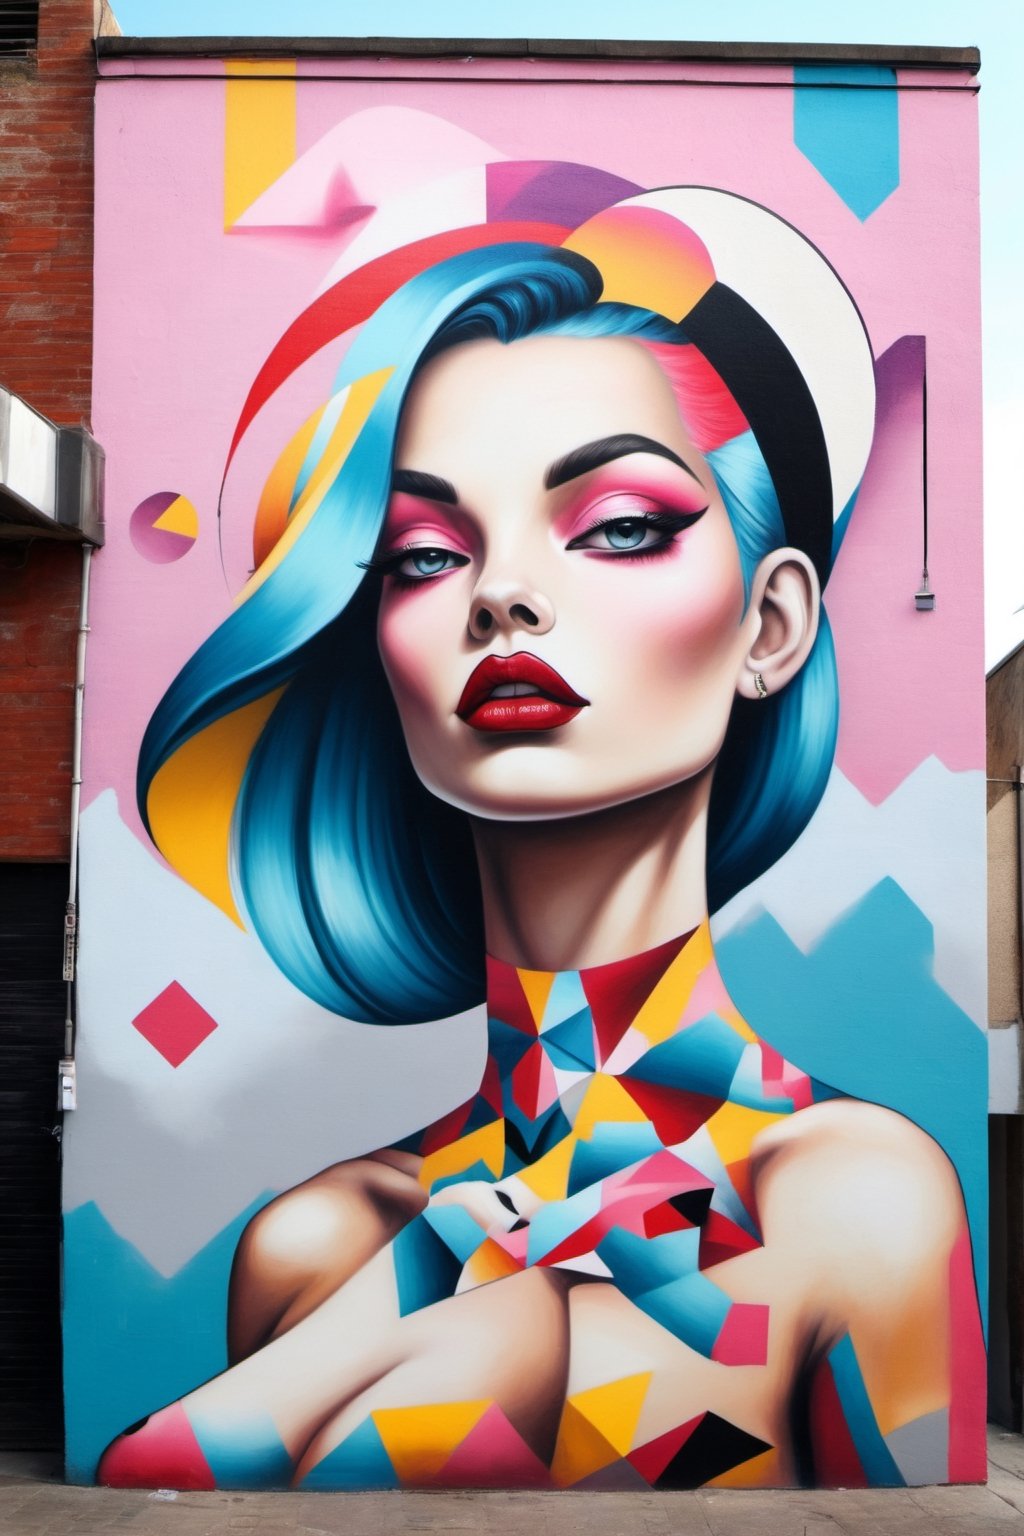 Street art, with its contemporary sensibility and a blend of geometric and surreal forms, conveys beauty,LinkGirl,DonM3l3m3nt4lXL,glitter